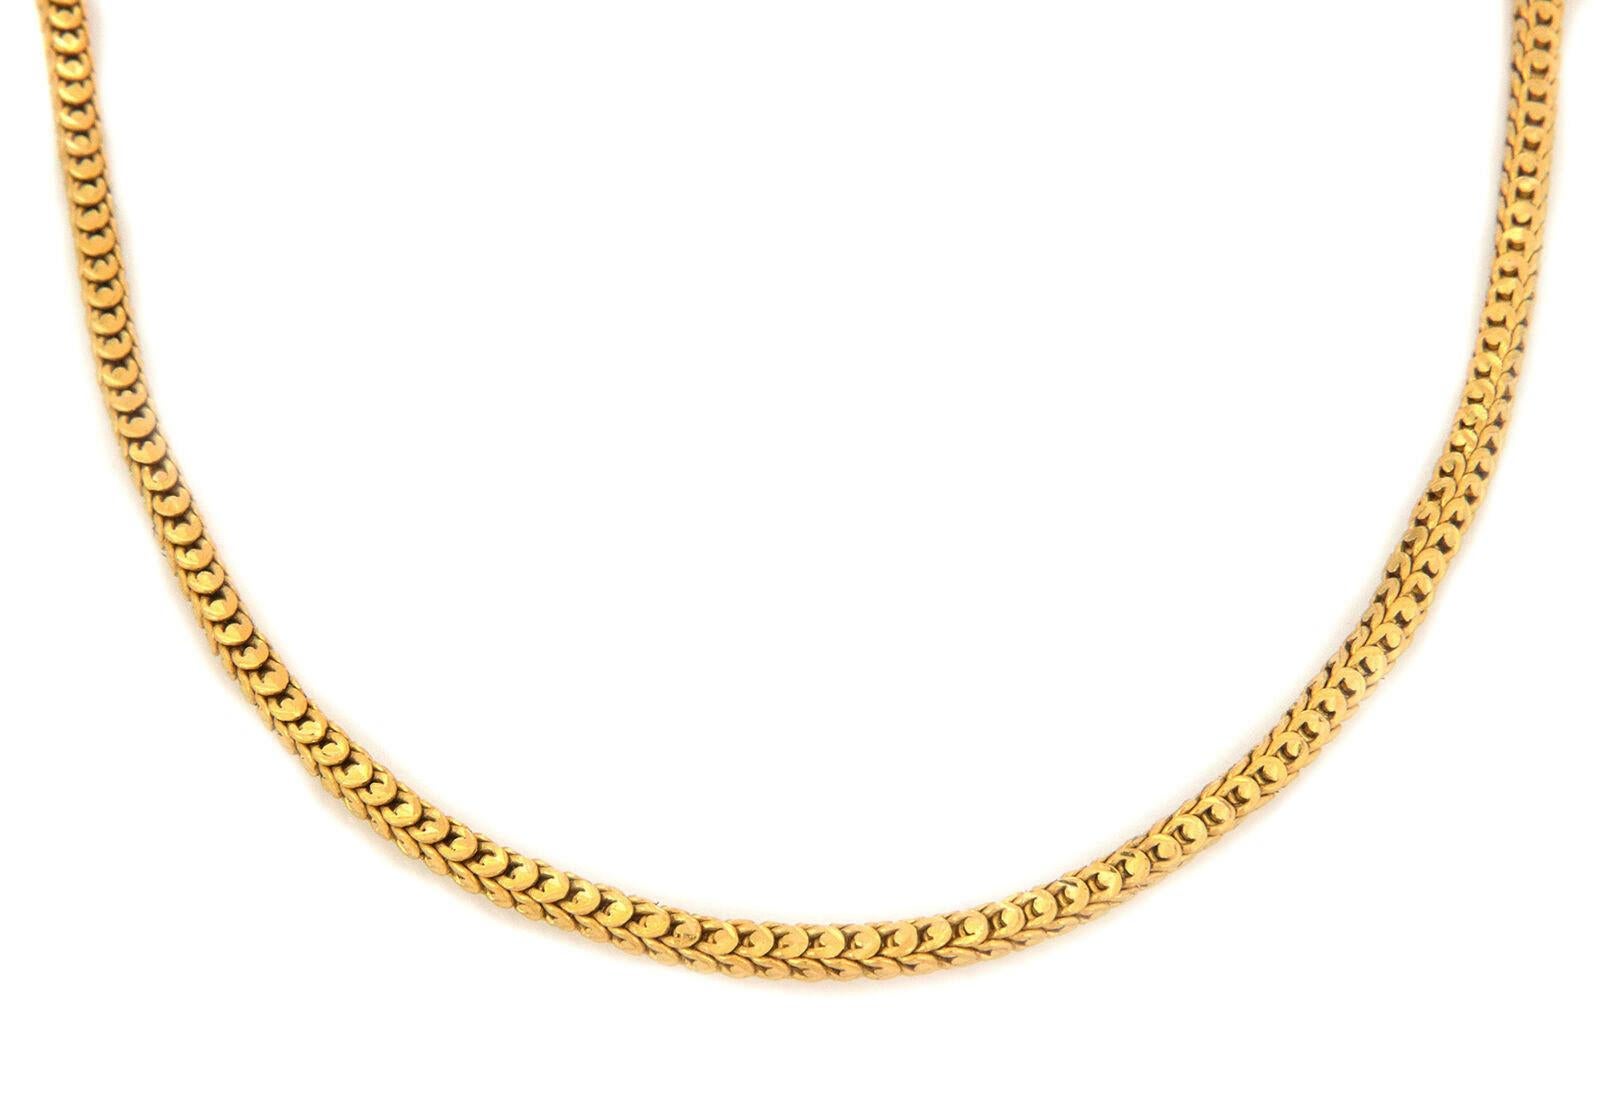 Double Dragon Head Clasp Long Dragon Scale 24k Gold Link Chain Necklace In Excellent Condition For Sale In Boca Raton, FL